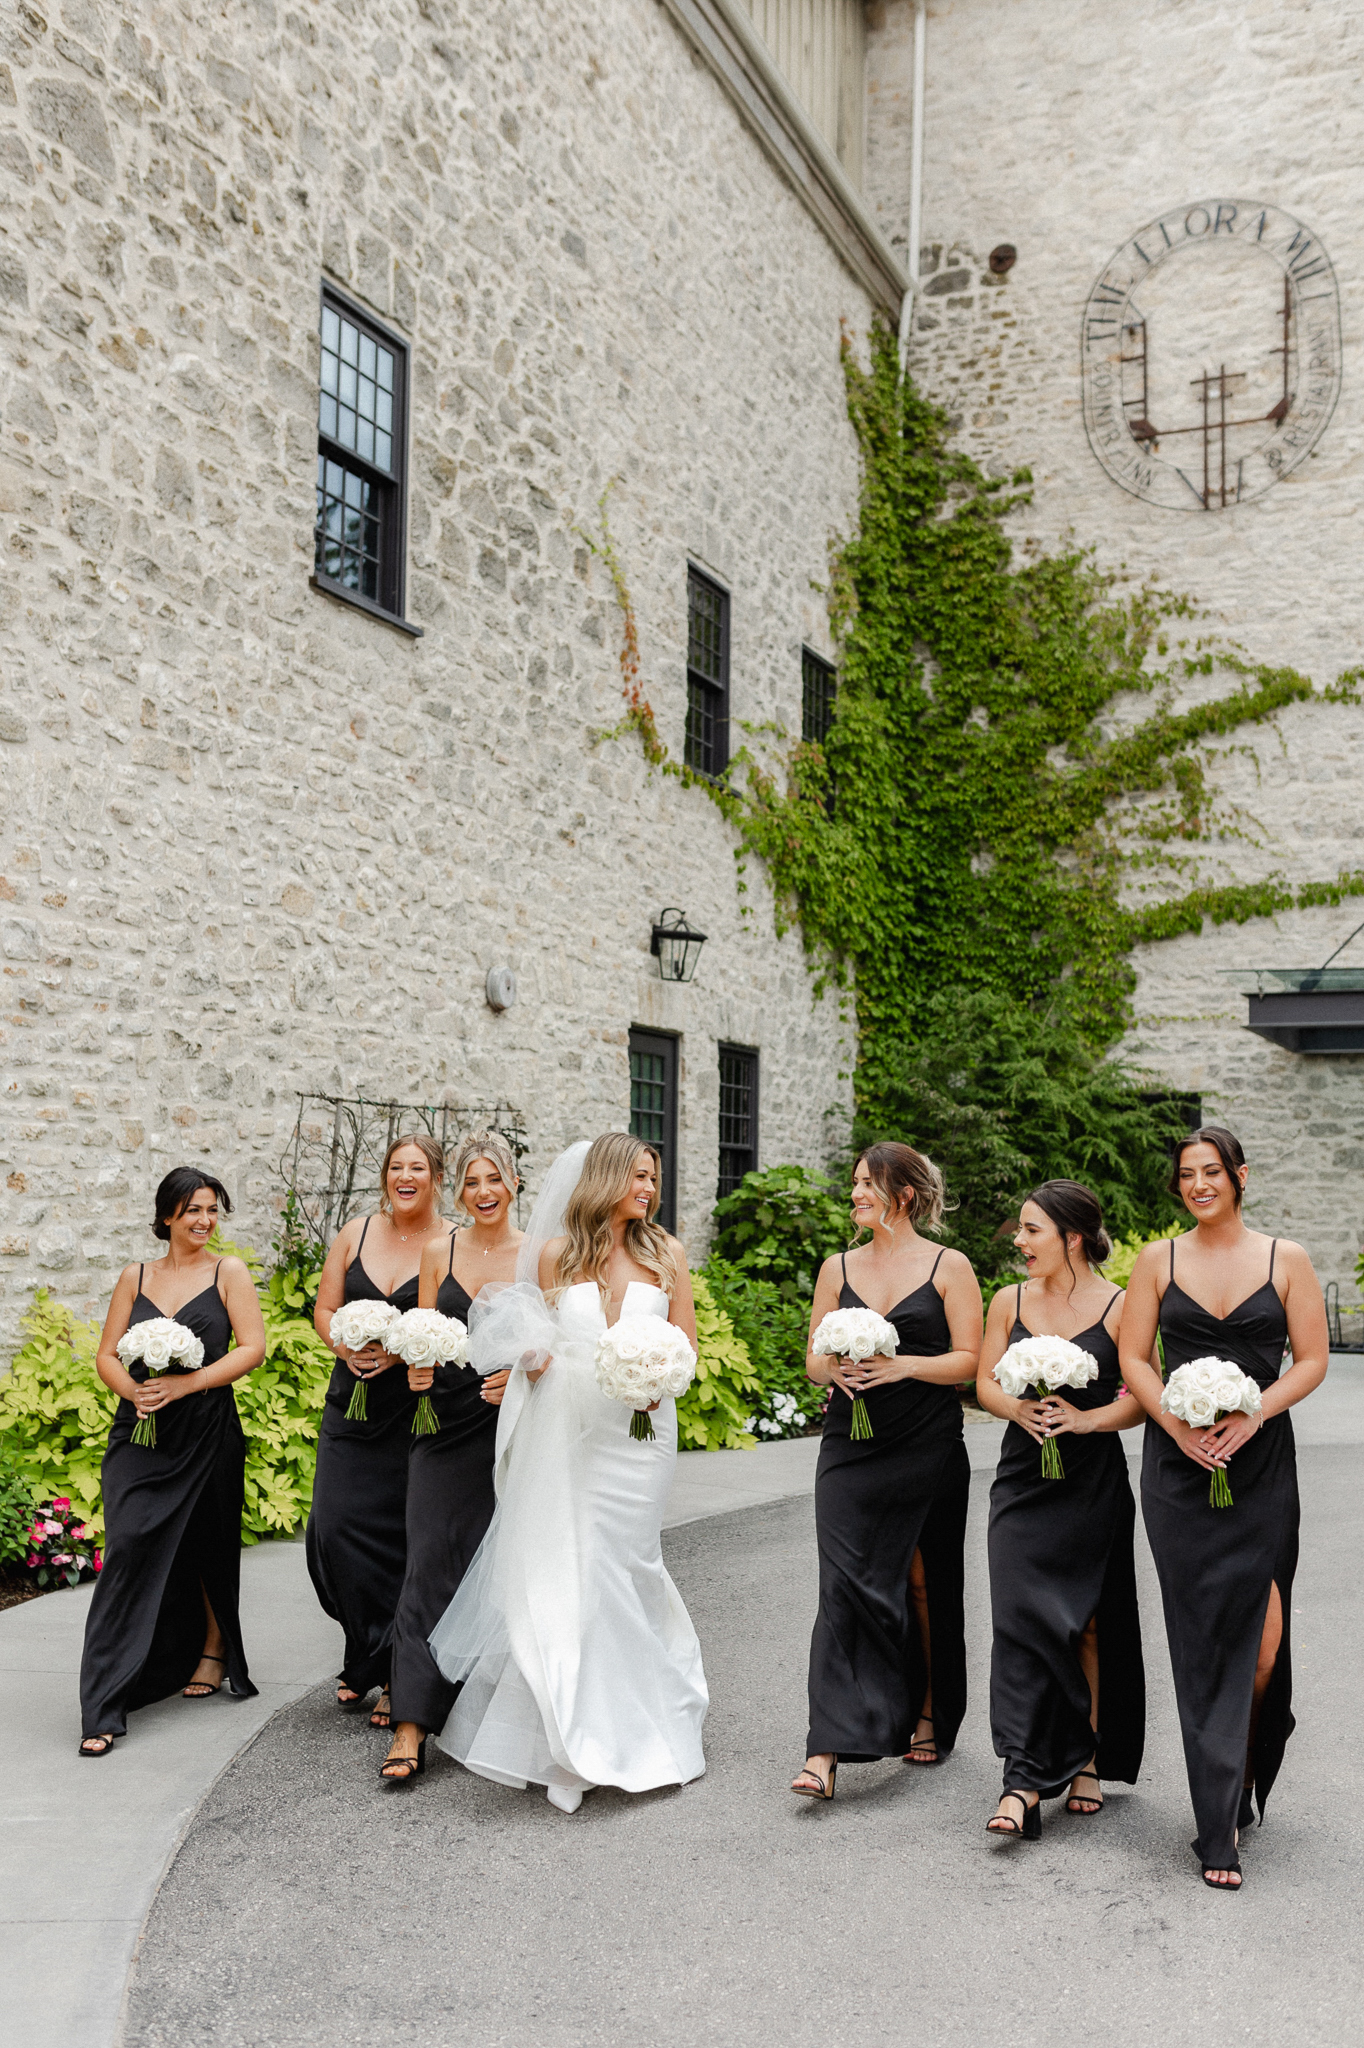 Bridesmaids elegantly dressed in black attire, holding beautiful white bouquets with the bride while walking and looking at each other